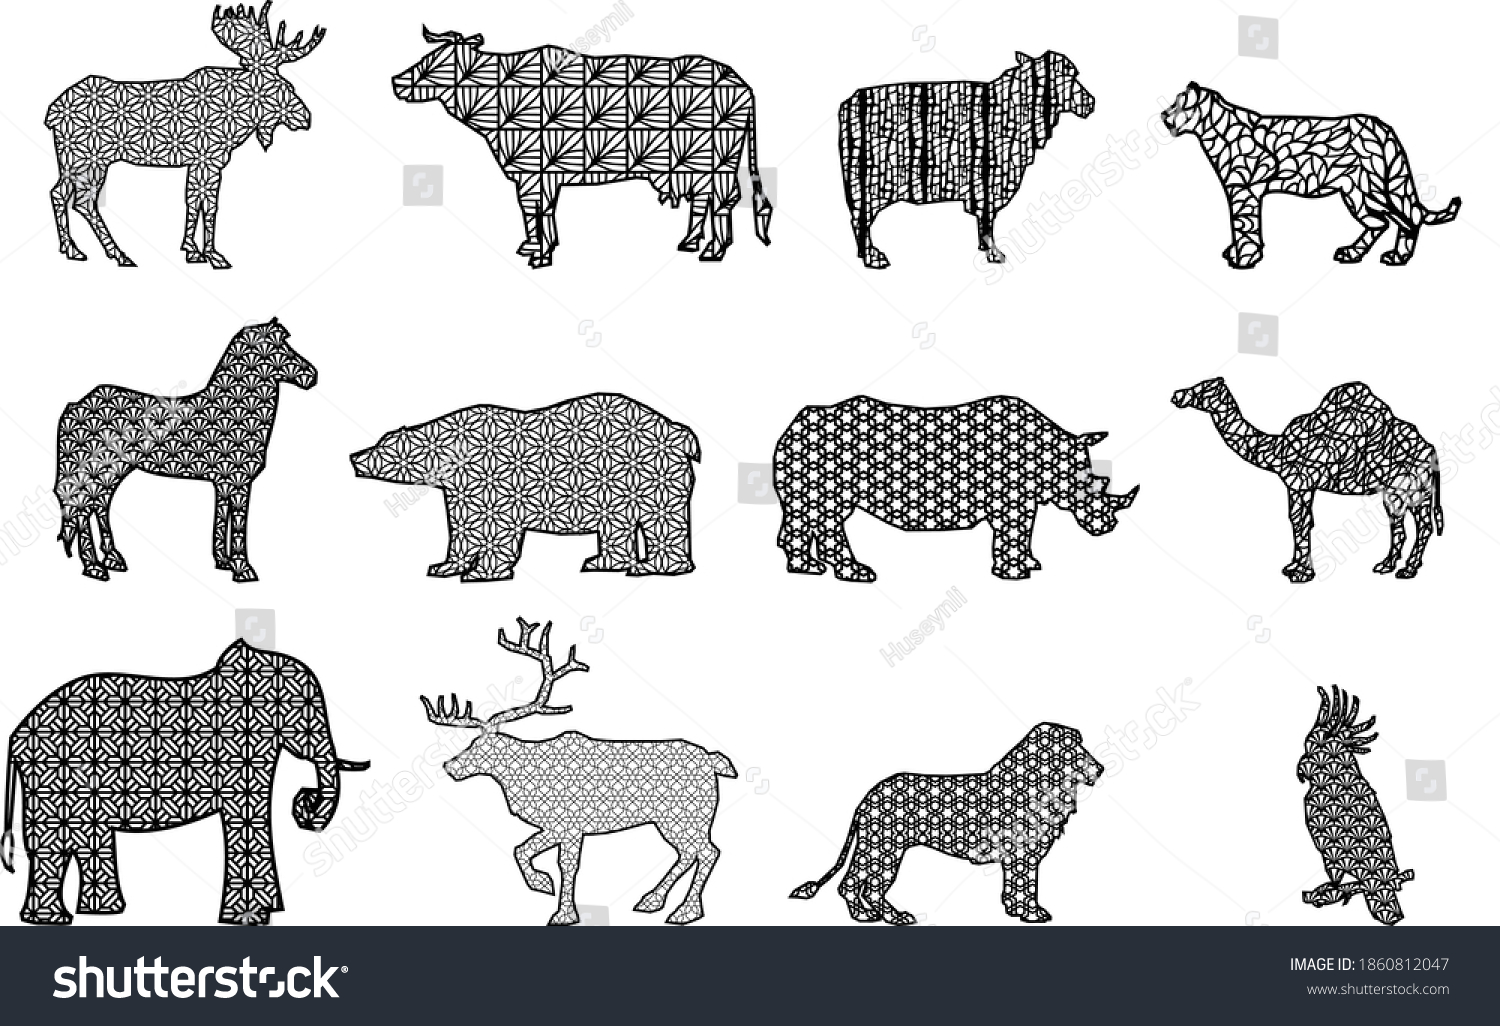 SVG of 12 Different Animal Silhouettes with geometric patterns | cnc file, laser cutting file | Dxf, Svg, Max, Cdr, Eps, FBX, AI, 3DS | Set 096 | svg